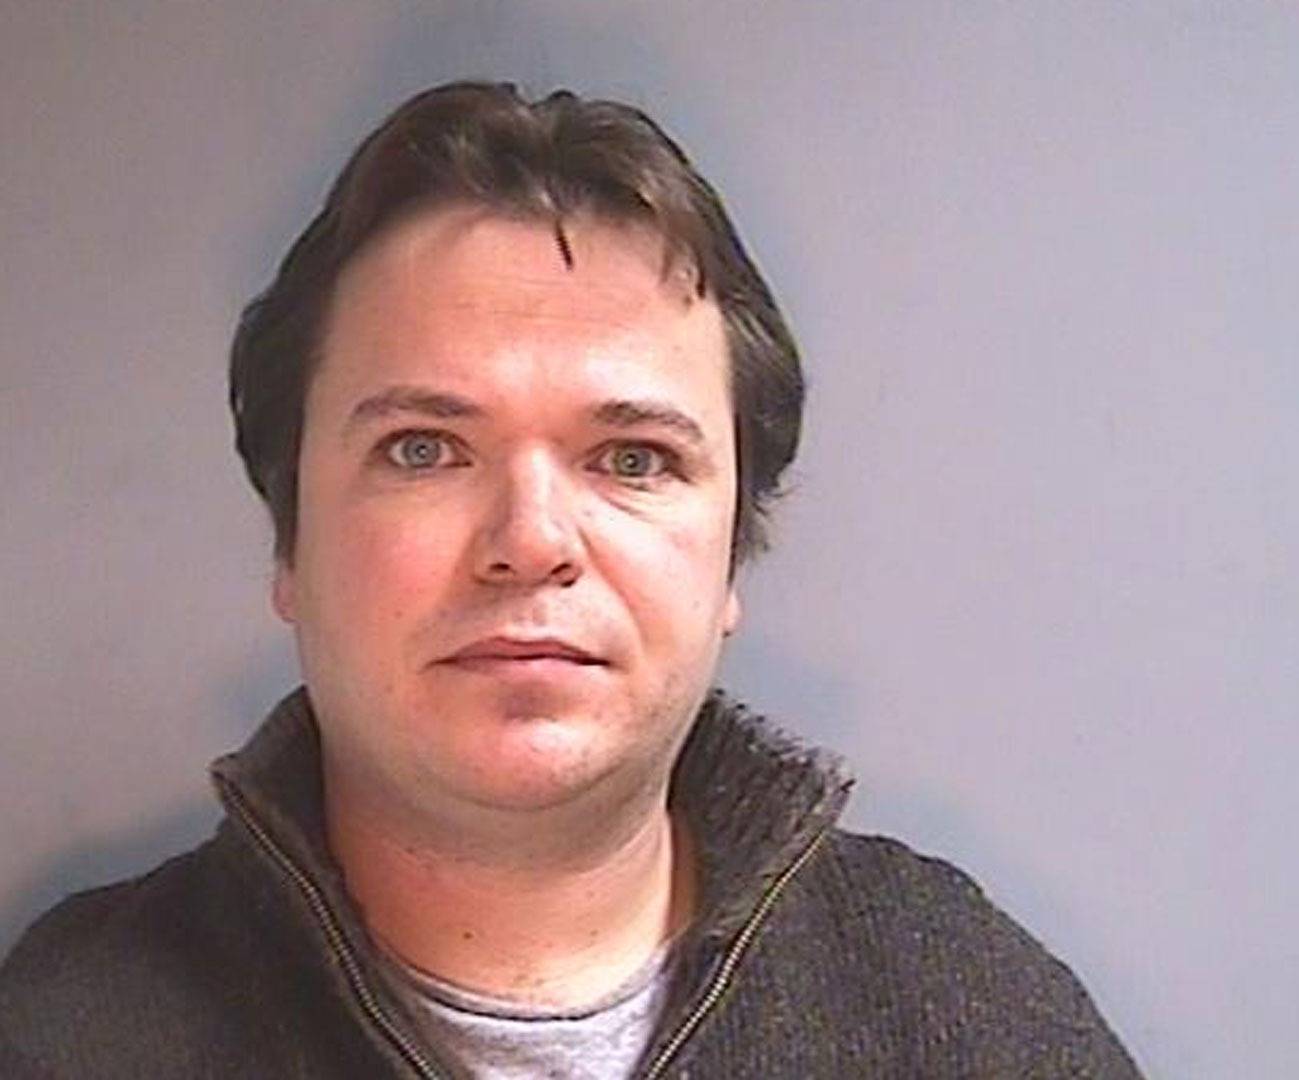 Damien Midgley was tried for child sex offences at York Crown Court in 2014